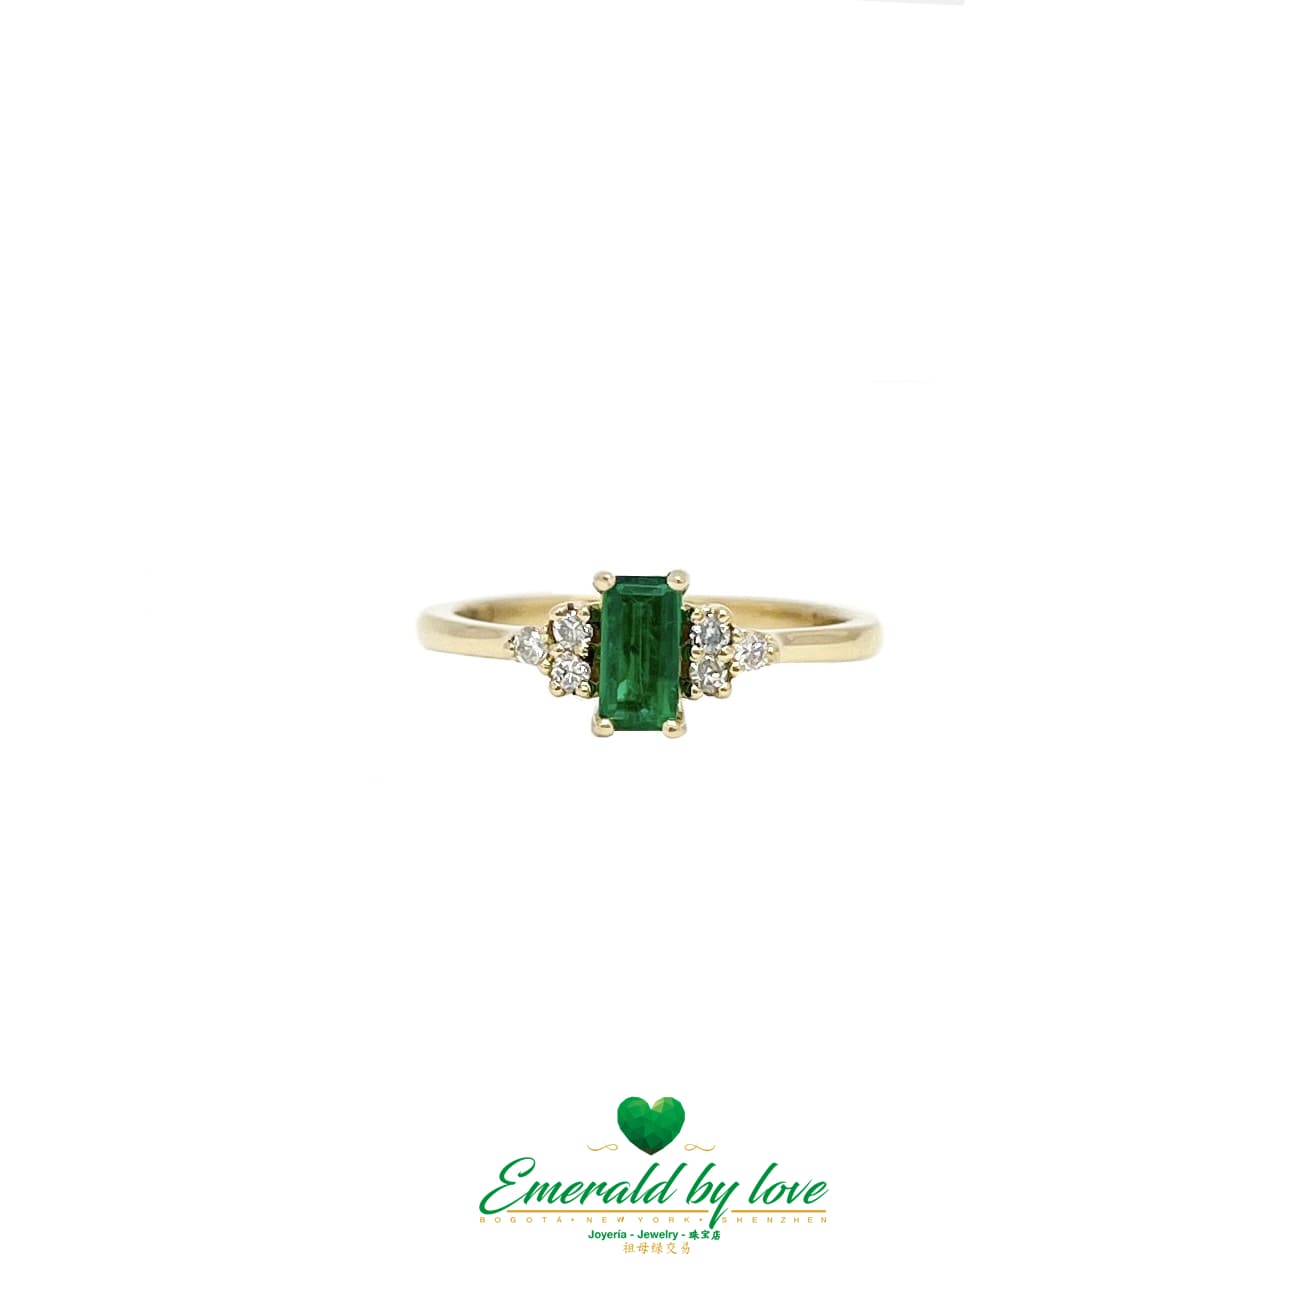 Yellow Gold Ring with Dark Green Baguette Emerald and Three Diamonds on Each Side